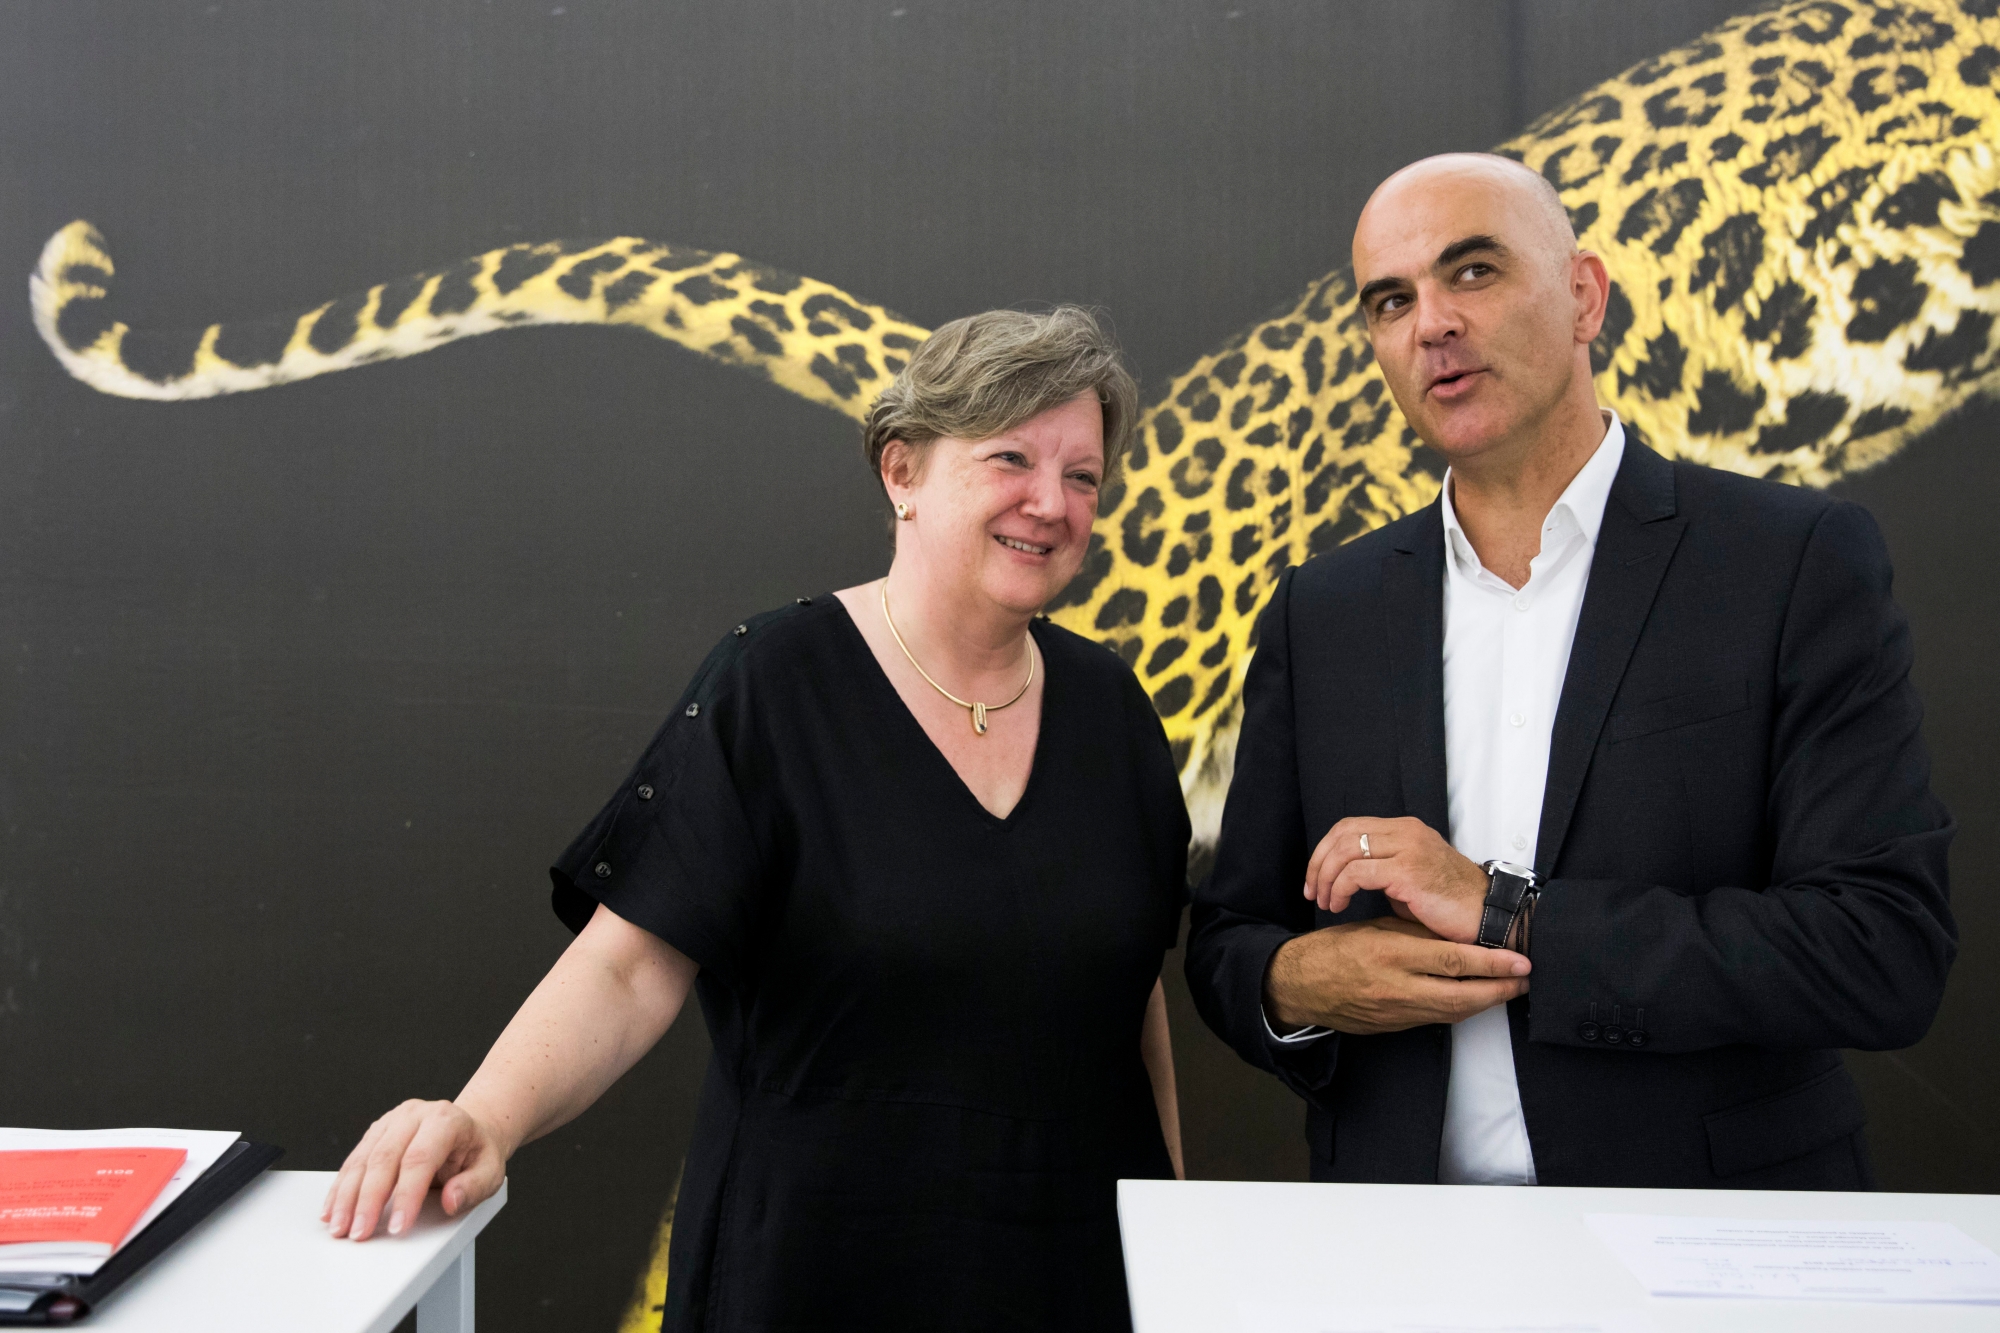 Swiss Federal President Alain Berset, right, and Isabelle Chassot, head of the Federal Office of Culture, left, attend a press conference at the 71st Locarno International Film Festival, in Locarno, Switzerland, 02 August 2018. The Festival del film Locarno 2018 runs from 01 to 11 August. (KEYSTONE/Peter Klaunzer) SWITZERLAND LOCARNO FILM FESTIVAL